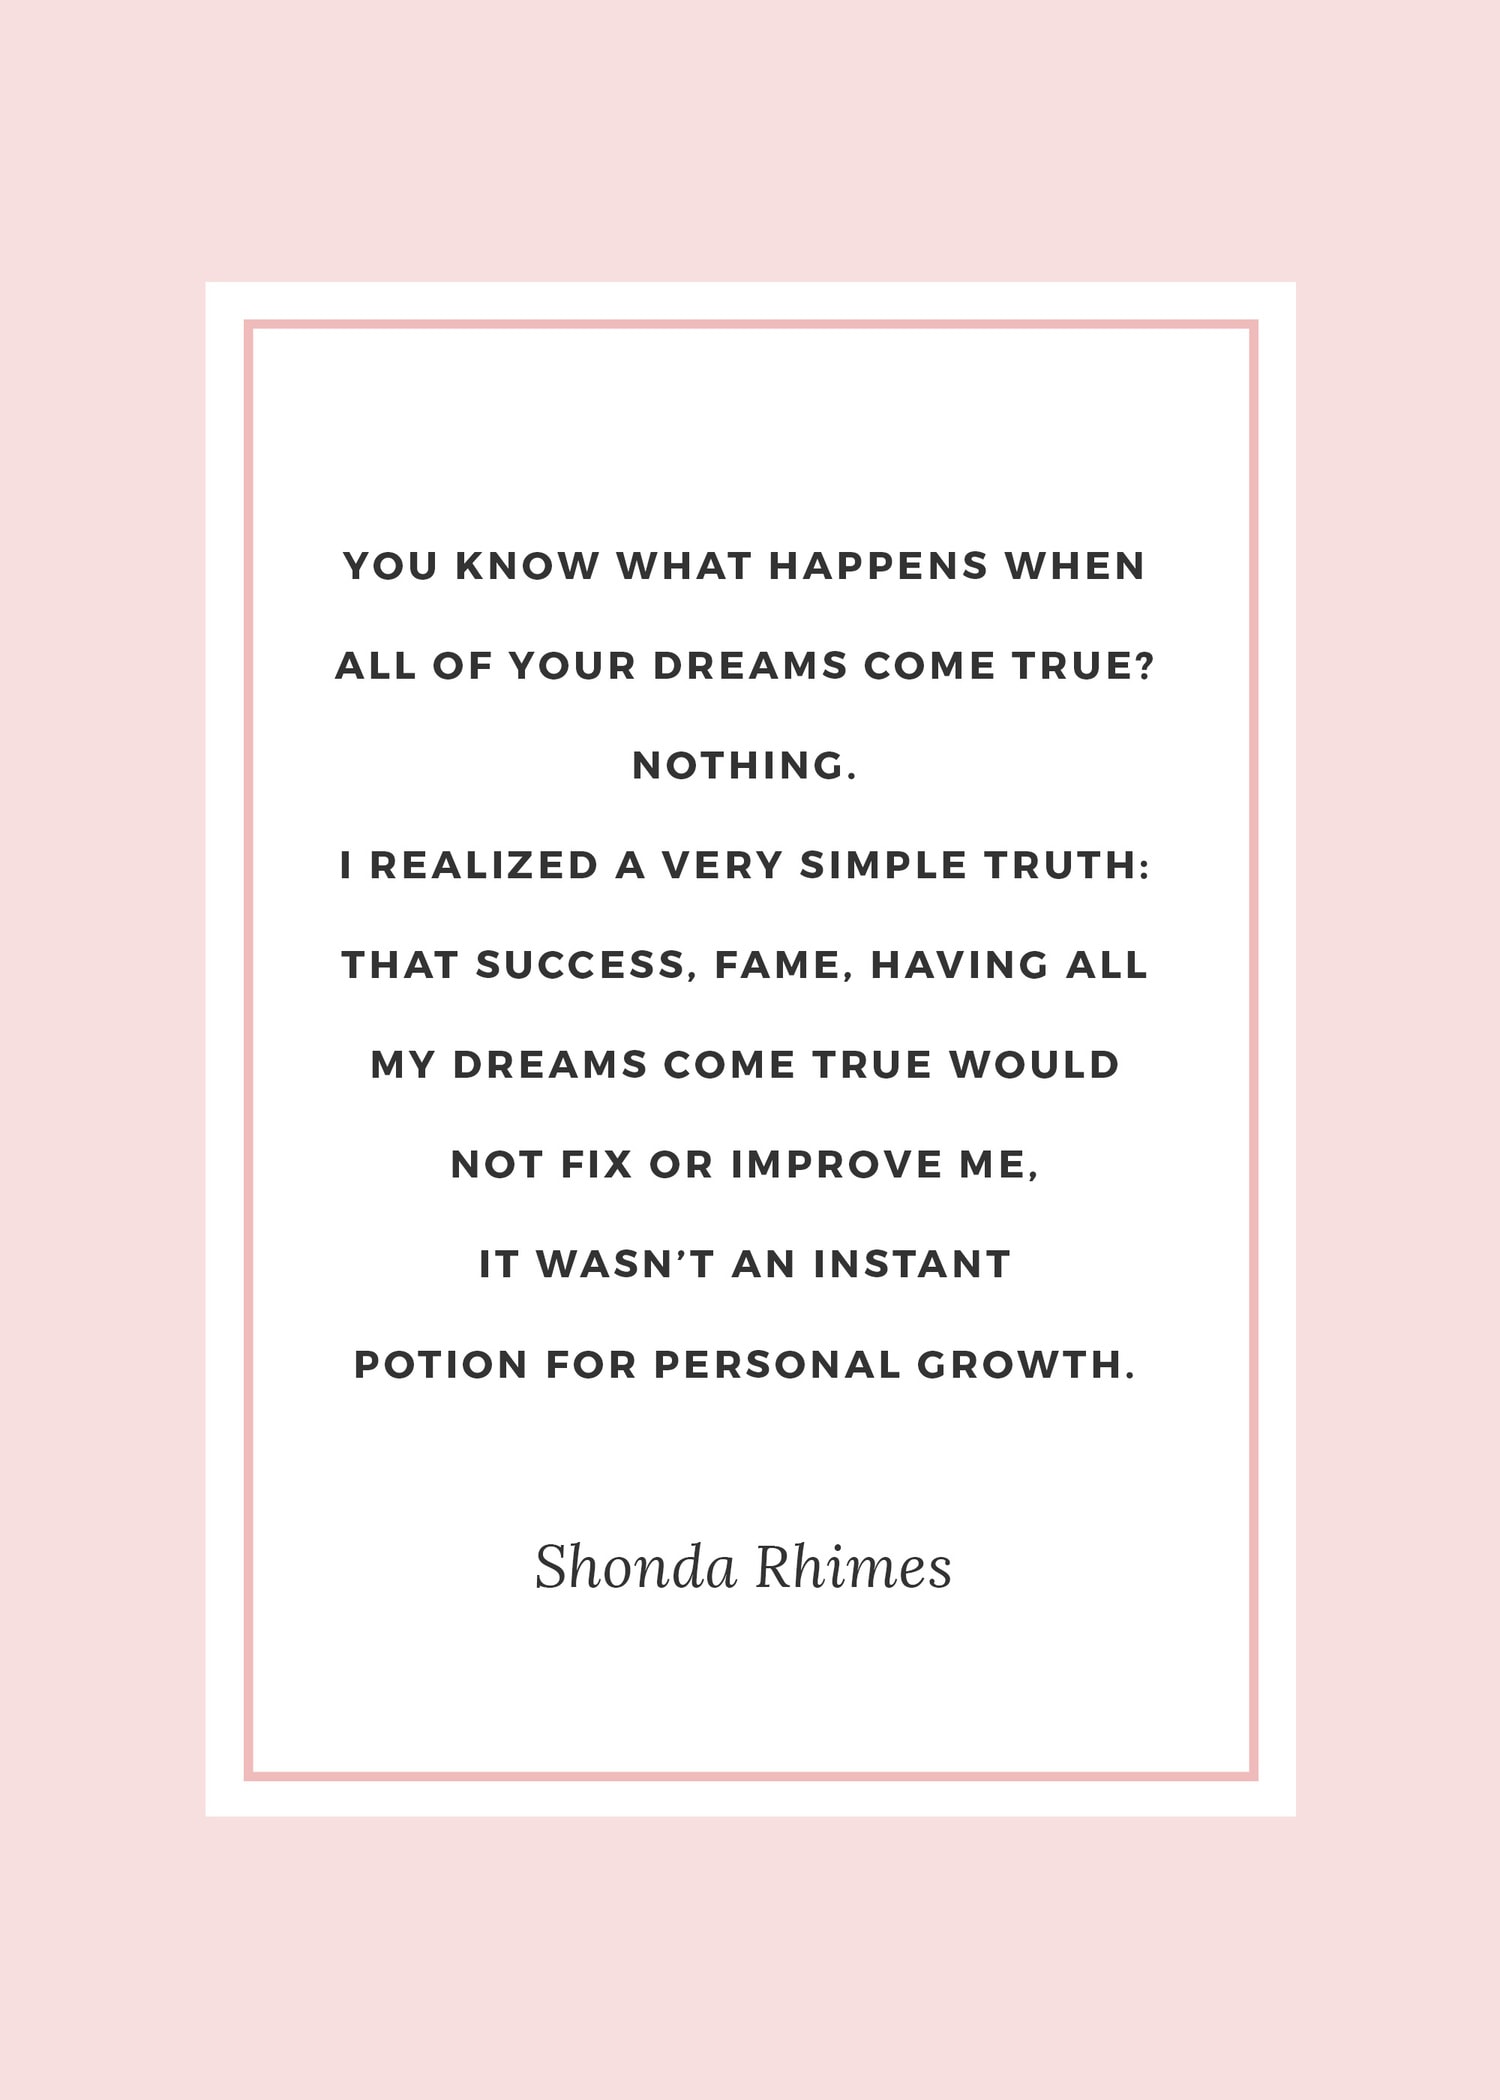 The best Shonda Rhimes quotes | “You know what happens when all of your dreams come true? Nothing. I realized a very simple truth: that success, fame, having all my dreams come true would not fix or improve me, it wasn’t an instant potion for personal growth.” ― Shonda Rhimes, Year of Yes: How to Dance It Out, Stand In the Sun and Be Your Own Person